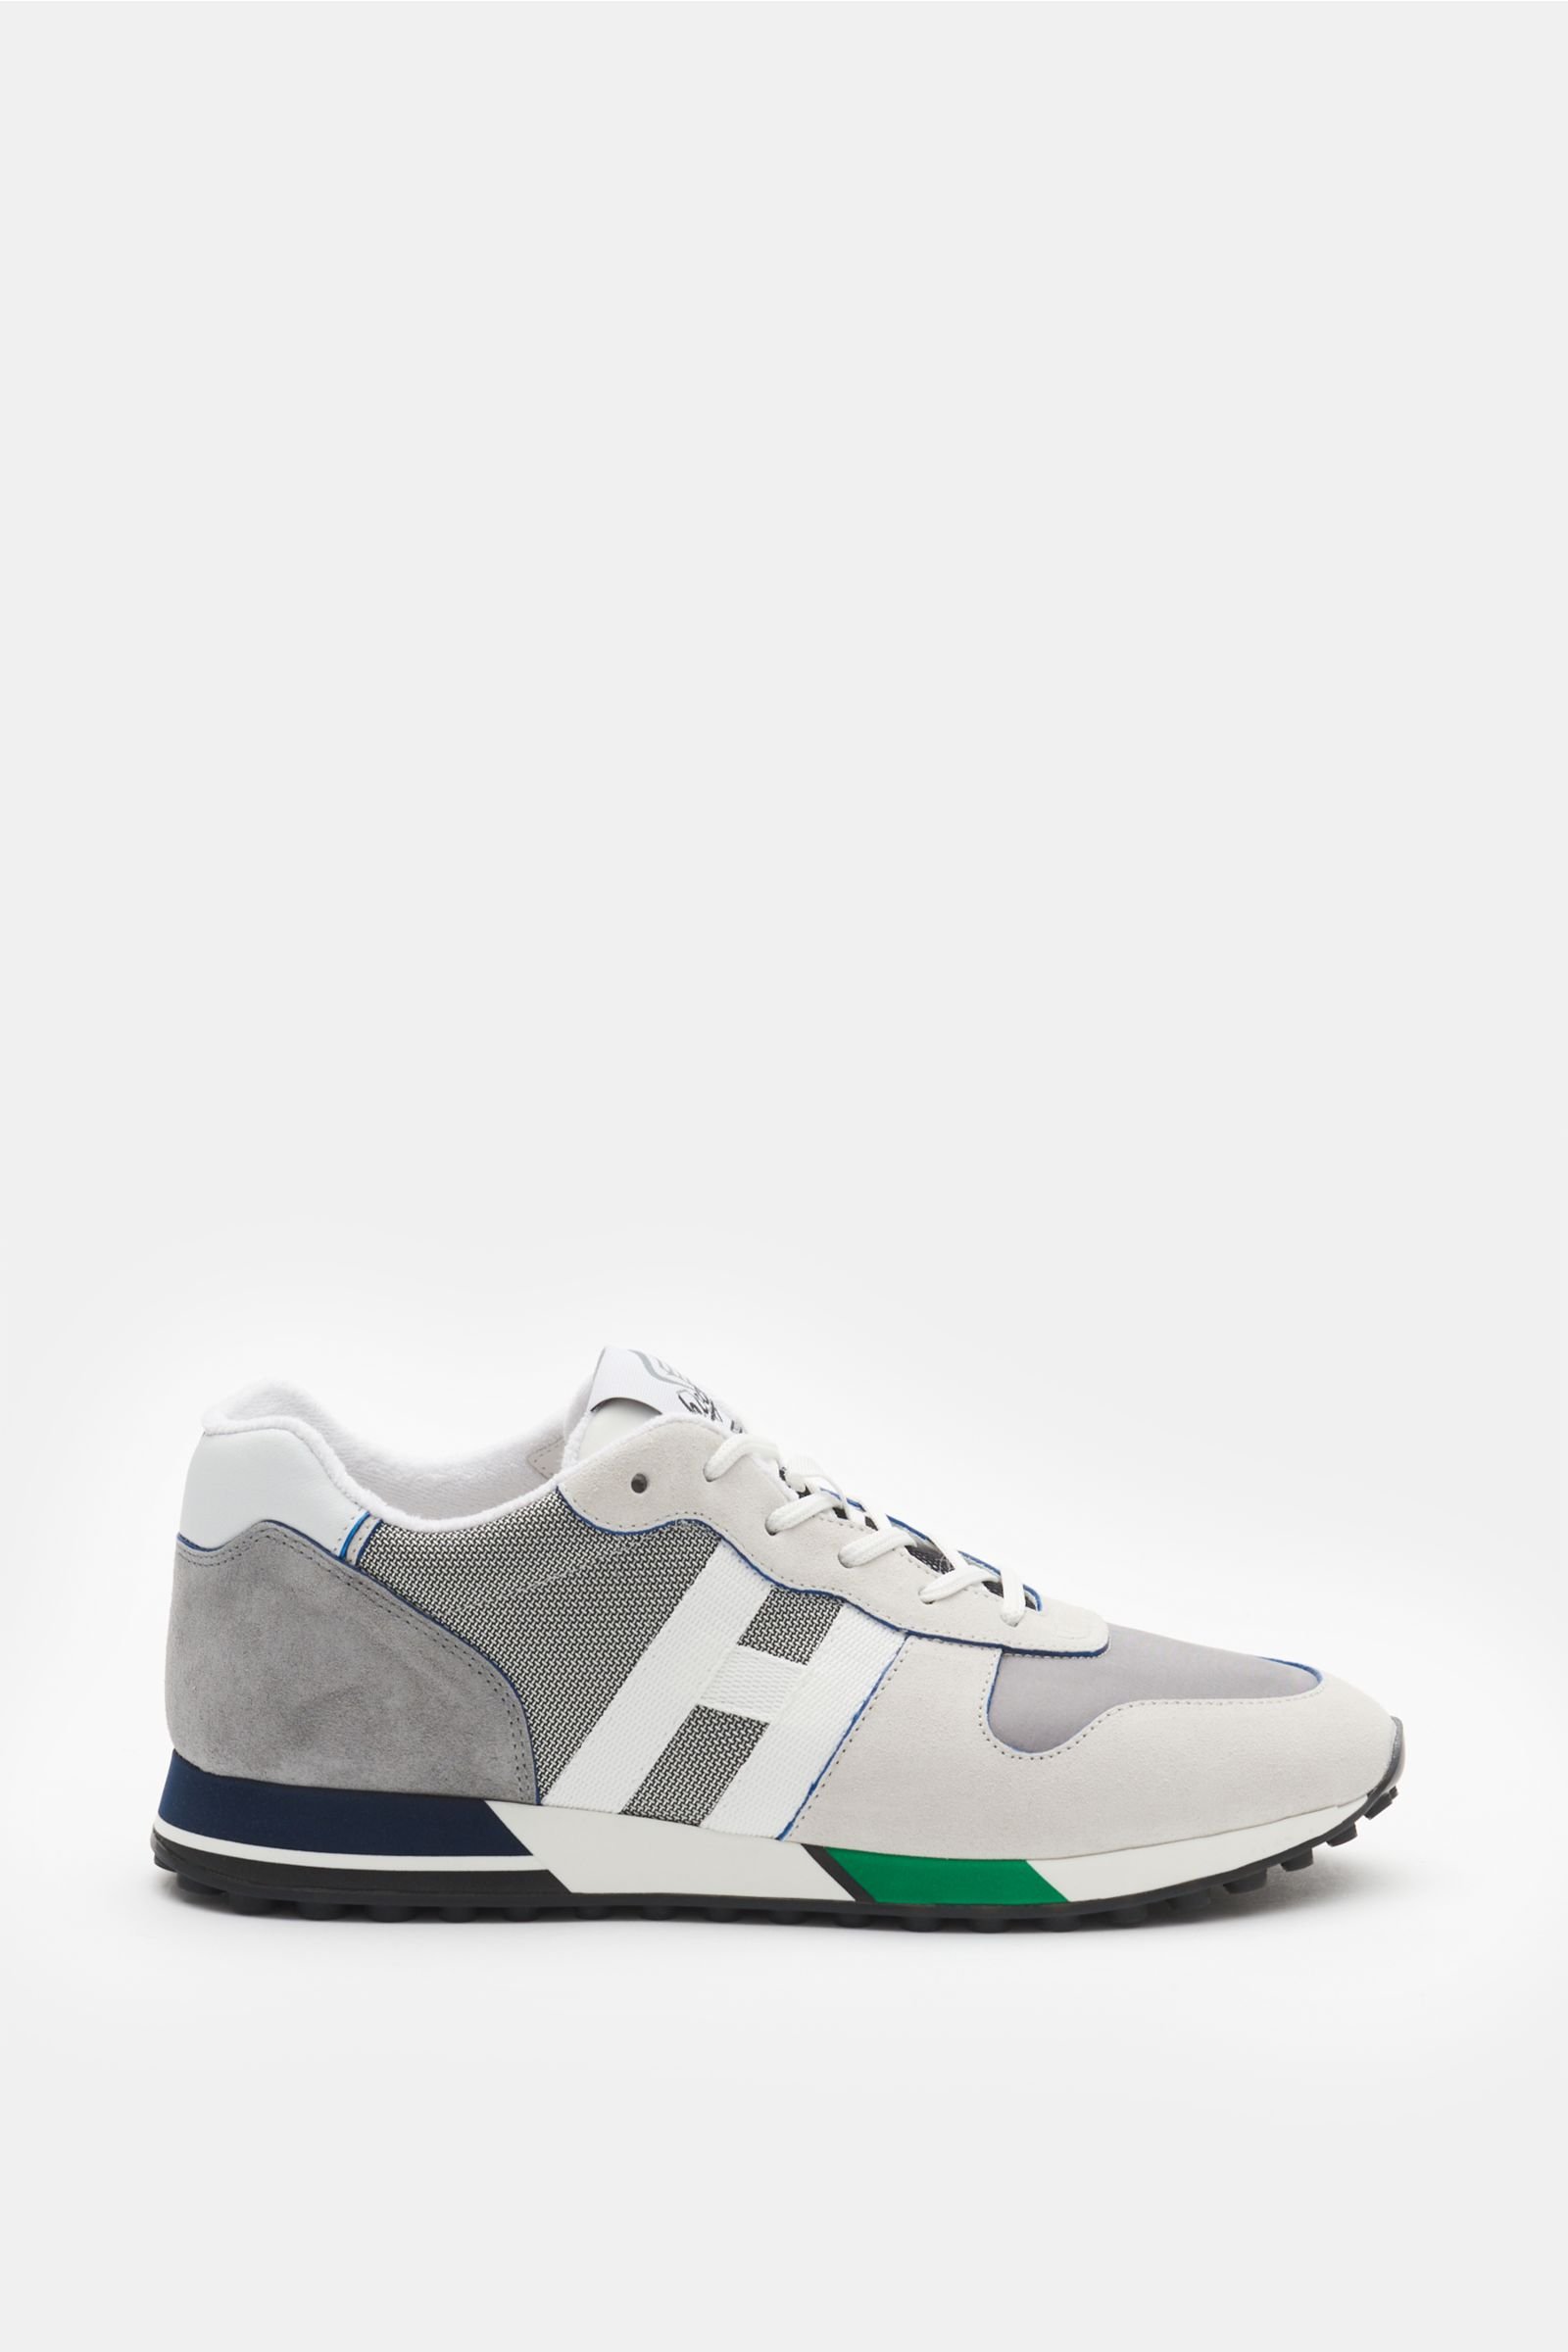 Sneakers 'H383' grey/white/green